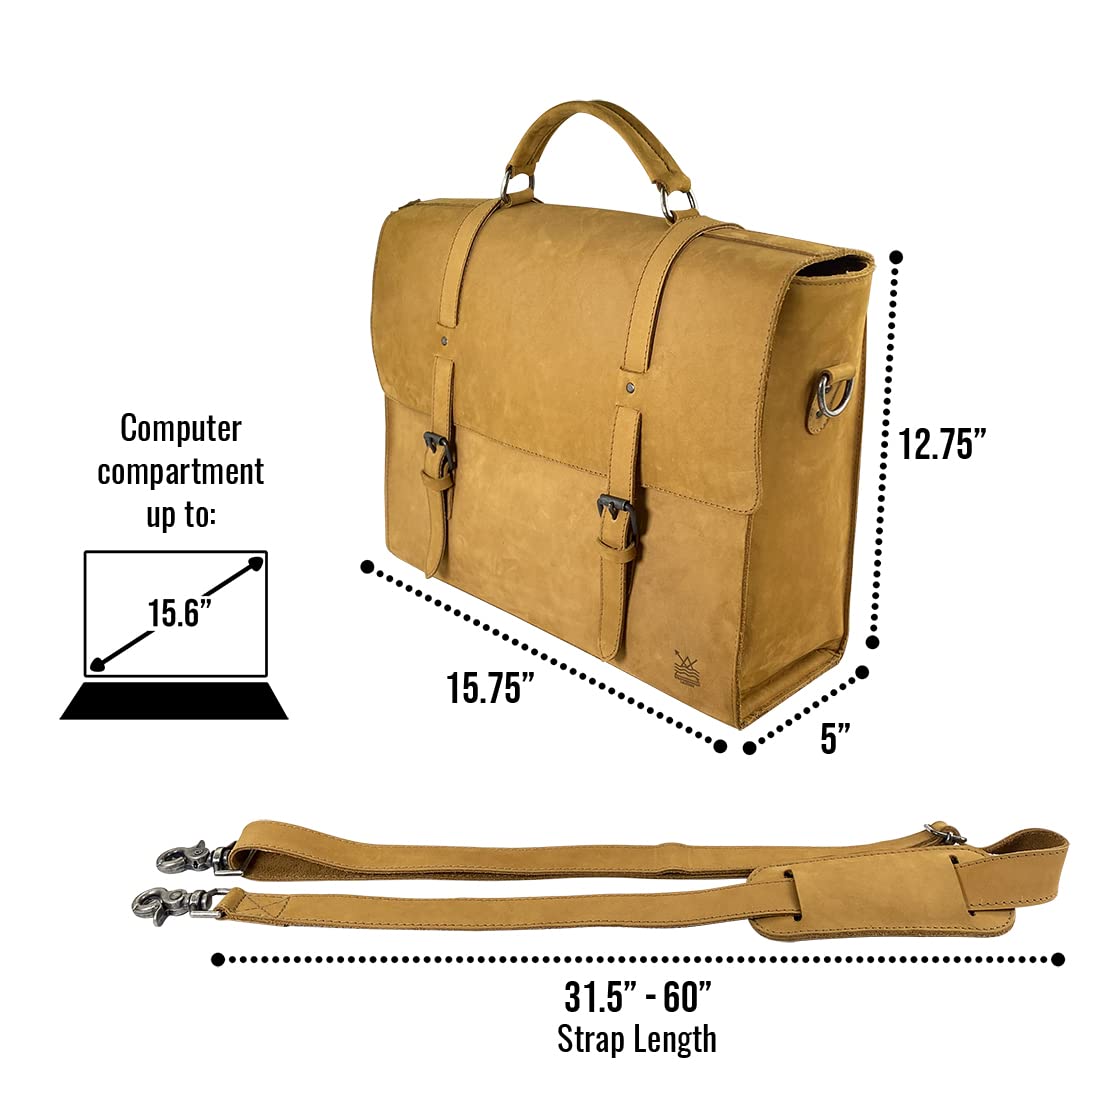 Weatherproof Leather, Messenger Bag Handmade from Suede Leather with Plaid Cotton Lining - Briefcase for Storing Computer, Books, with Zipper Closure, Adjustable Crossbody Strap - Old Tobacco